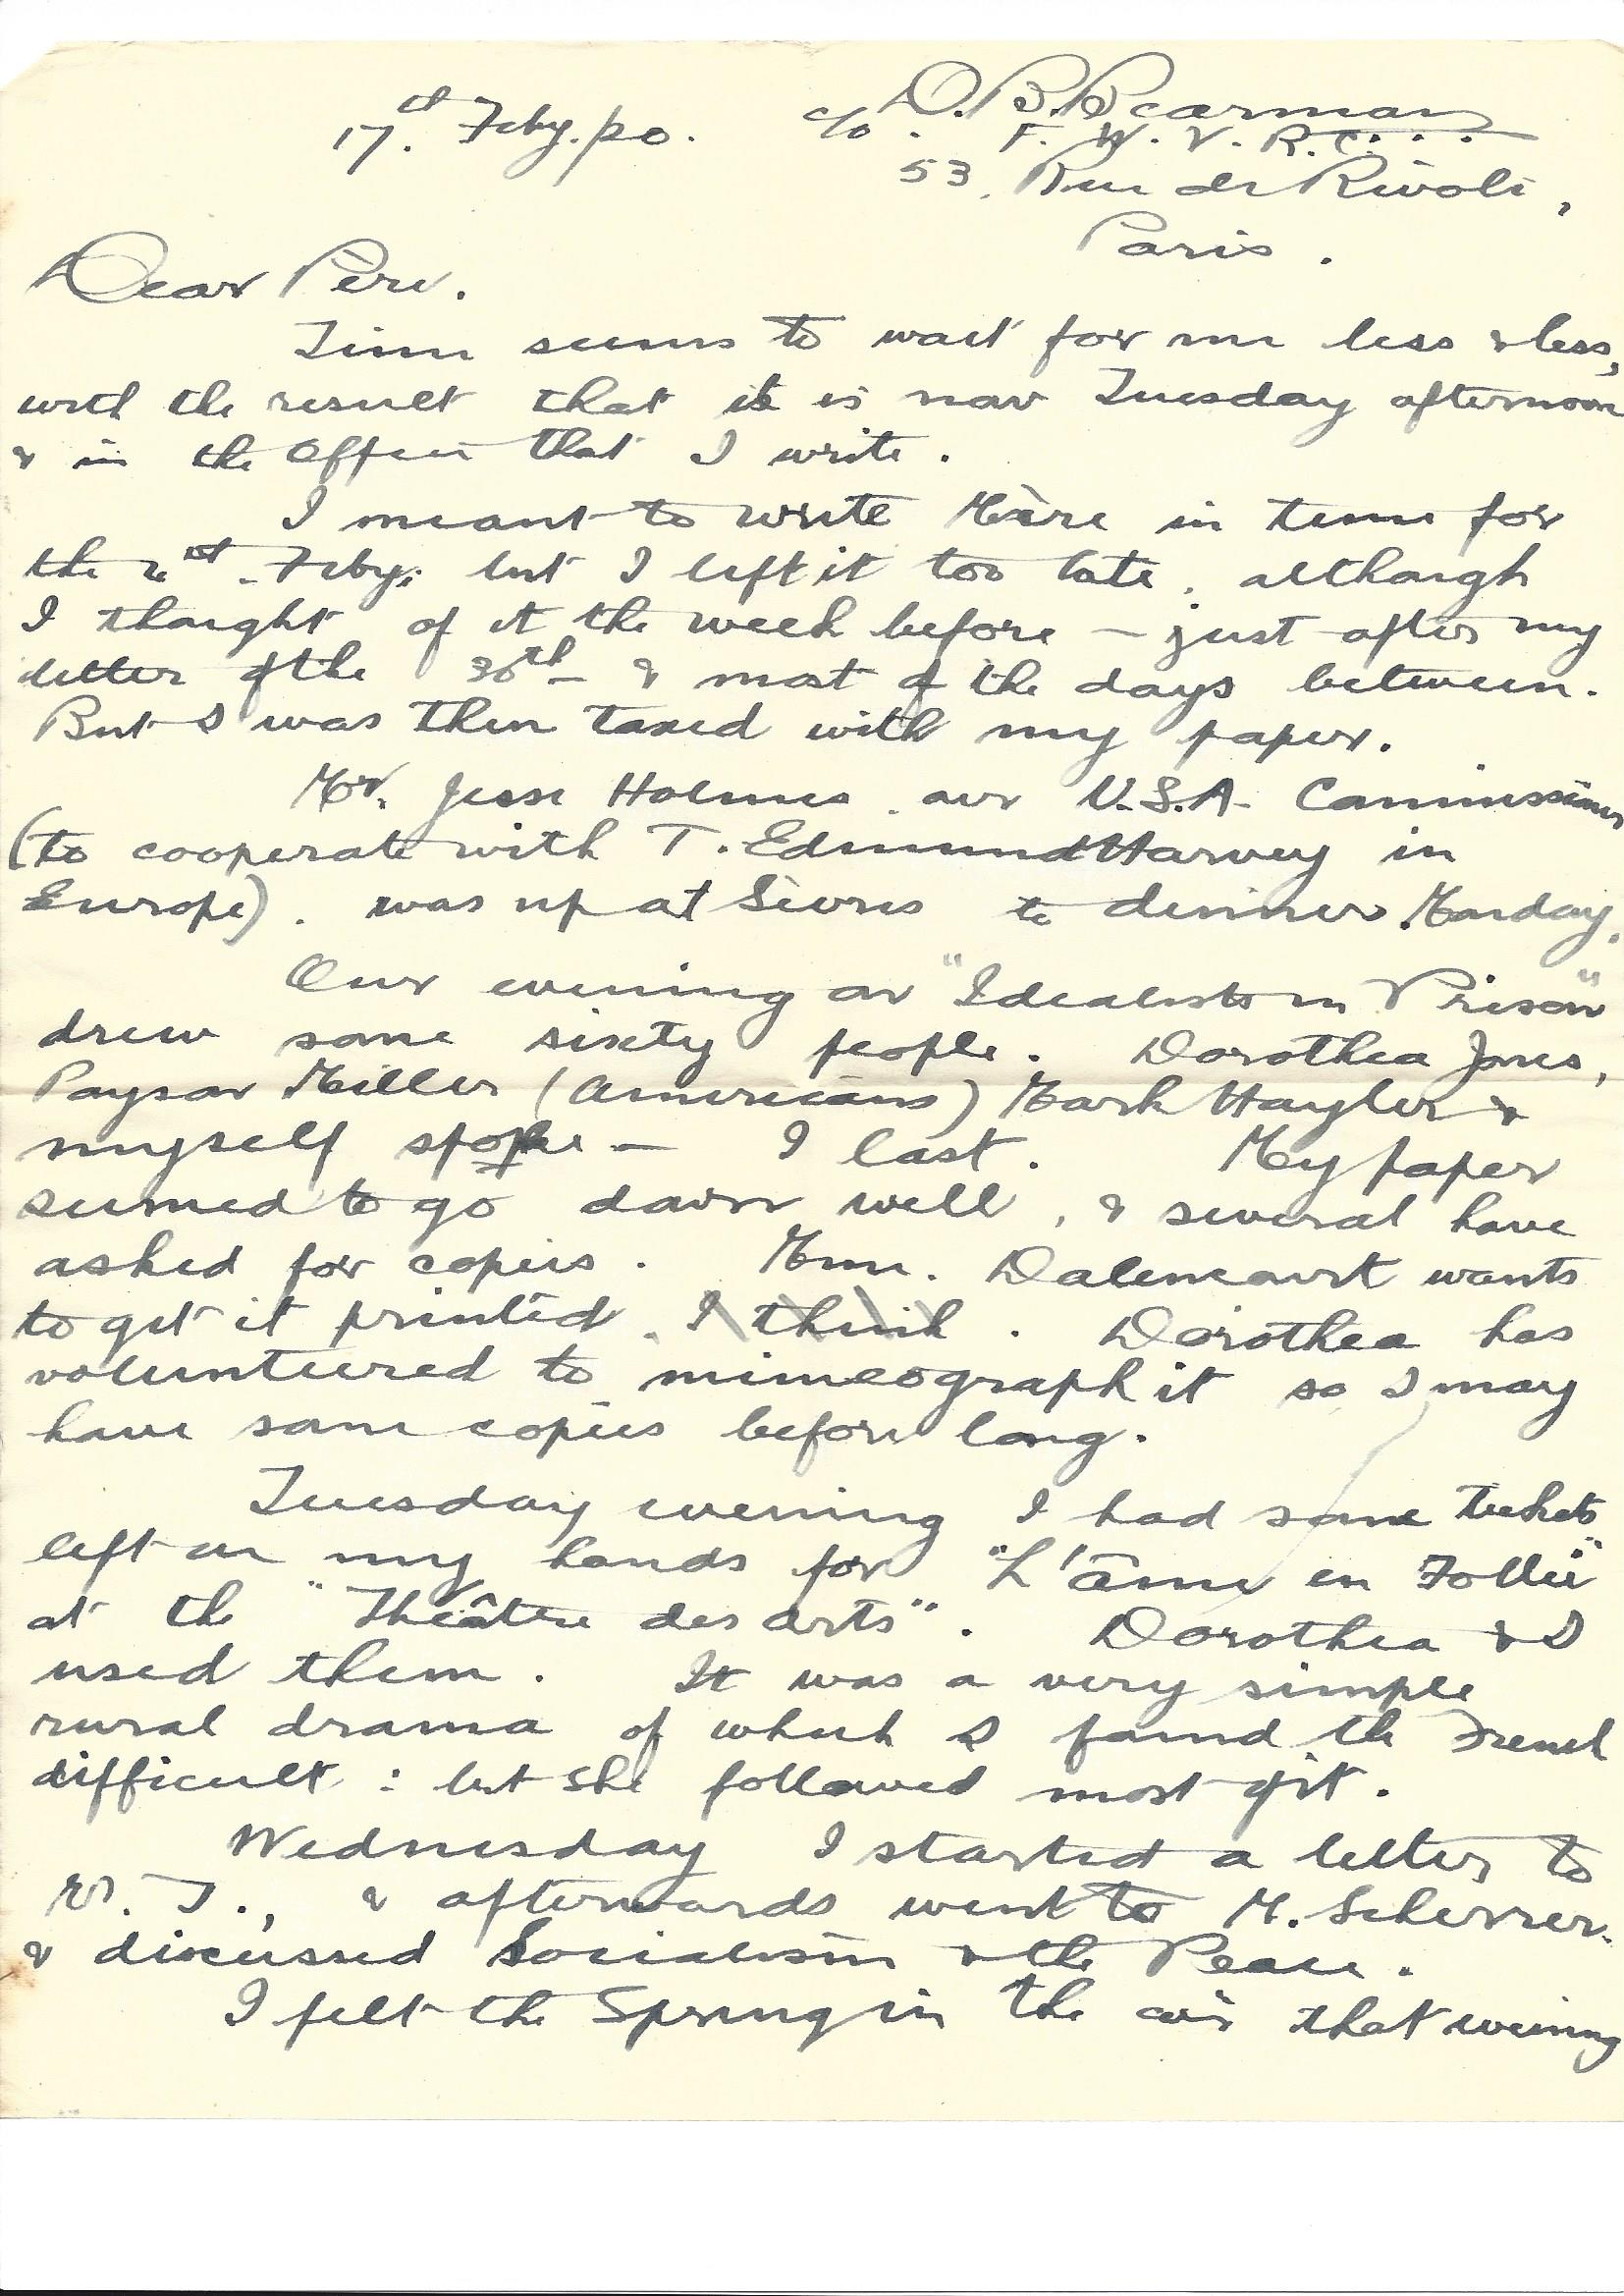 1920-02-17 page 2 letter by Donald Bearman